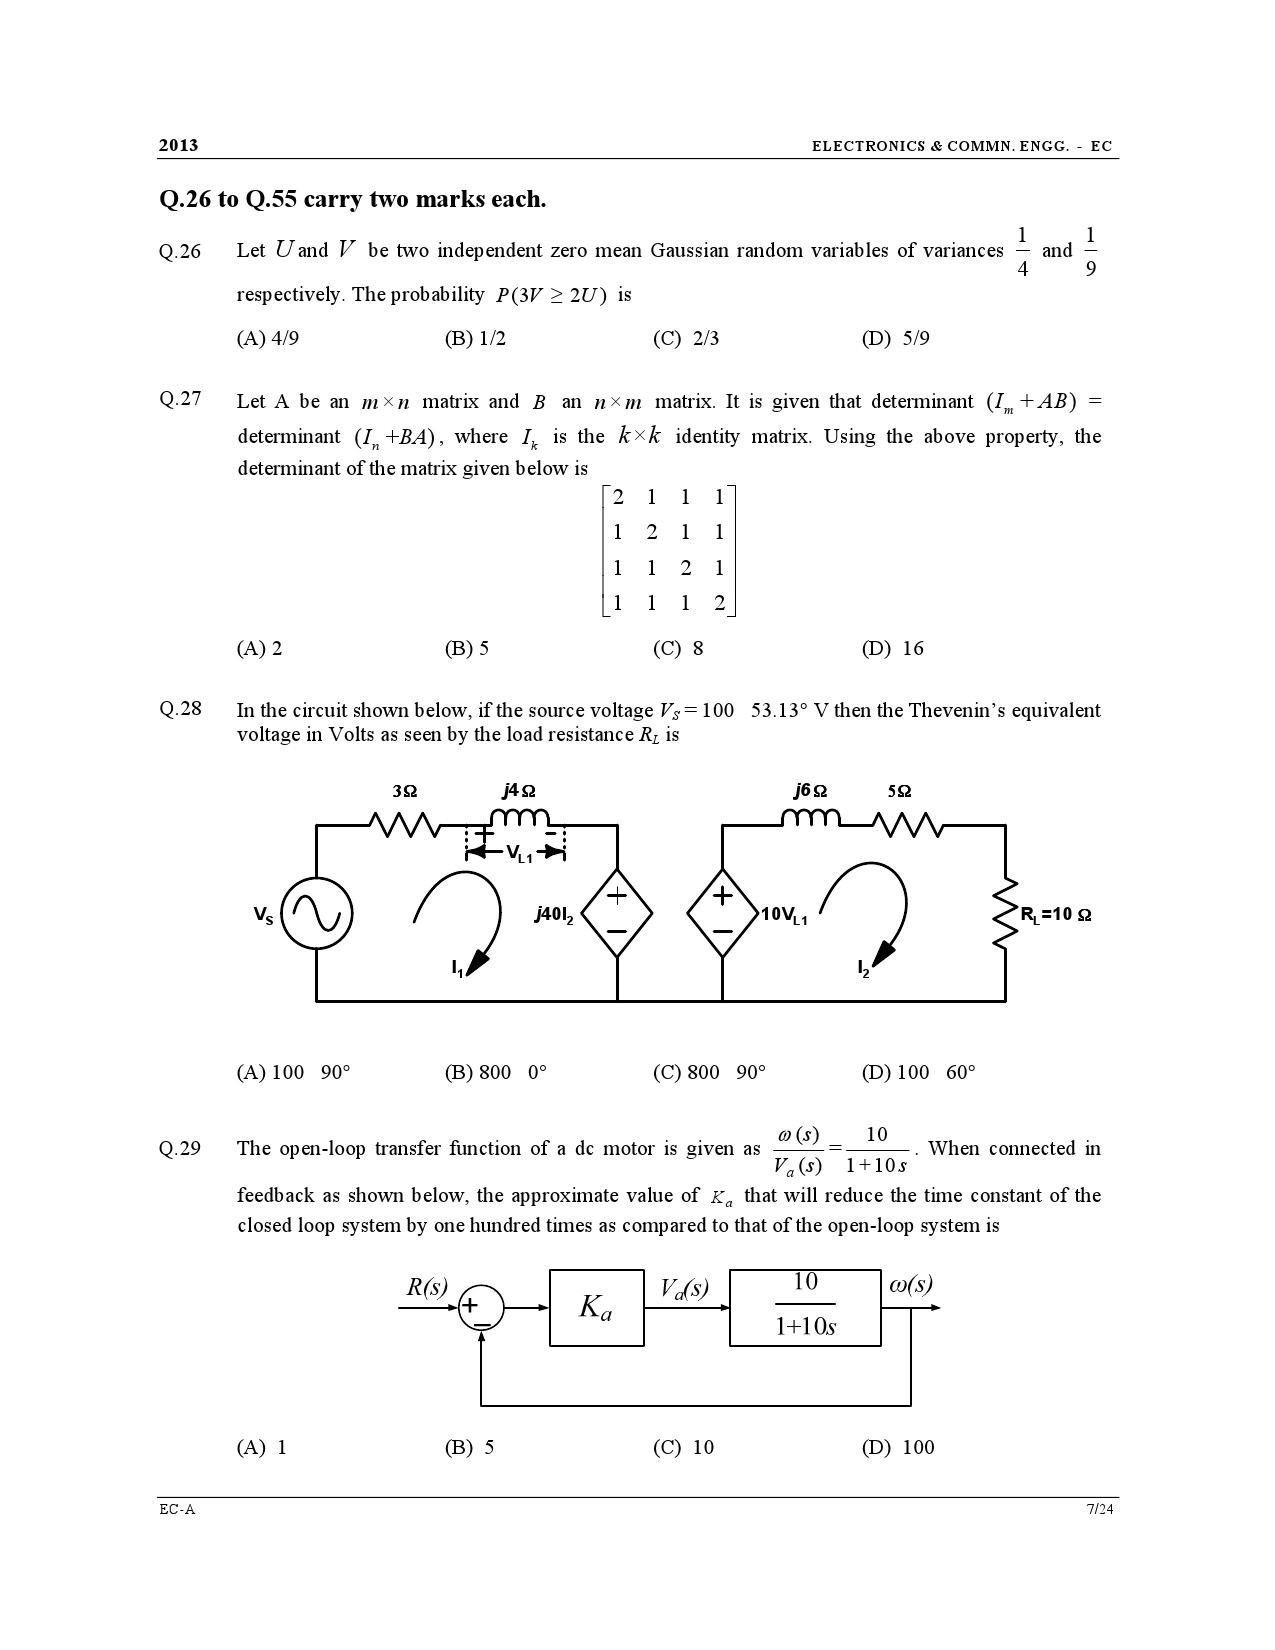 GATE Exam Question Paper 2013 Electronics and Communication Engineering 7